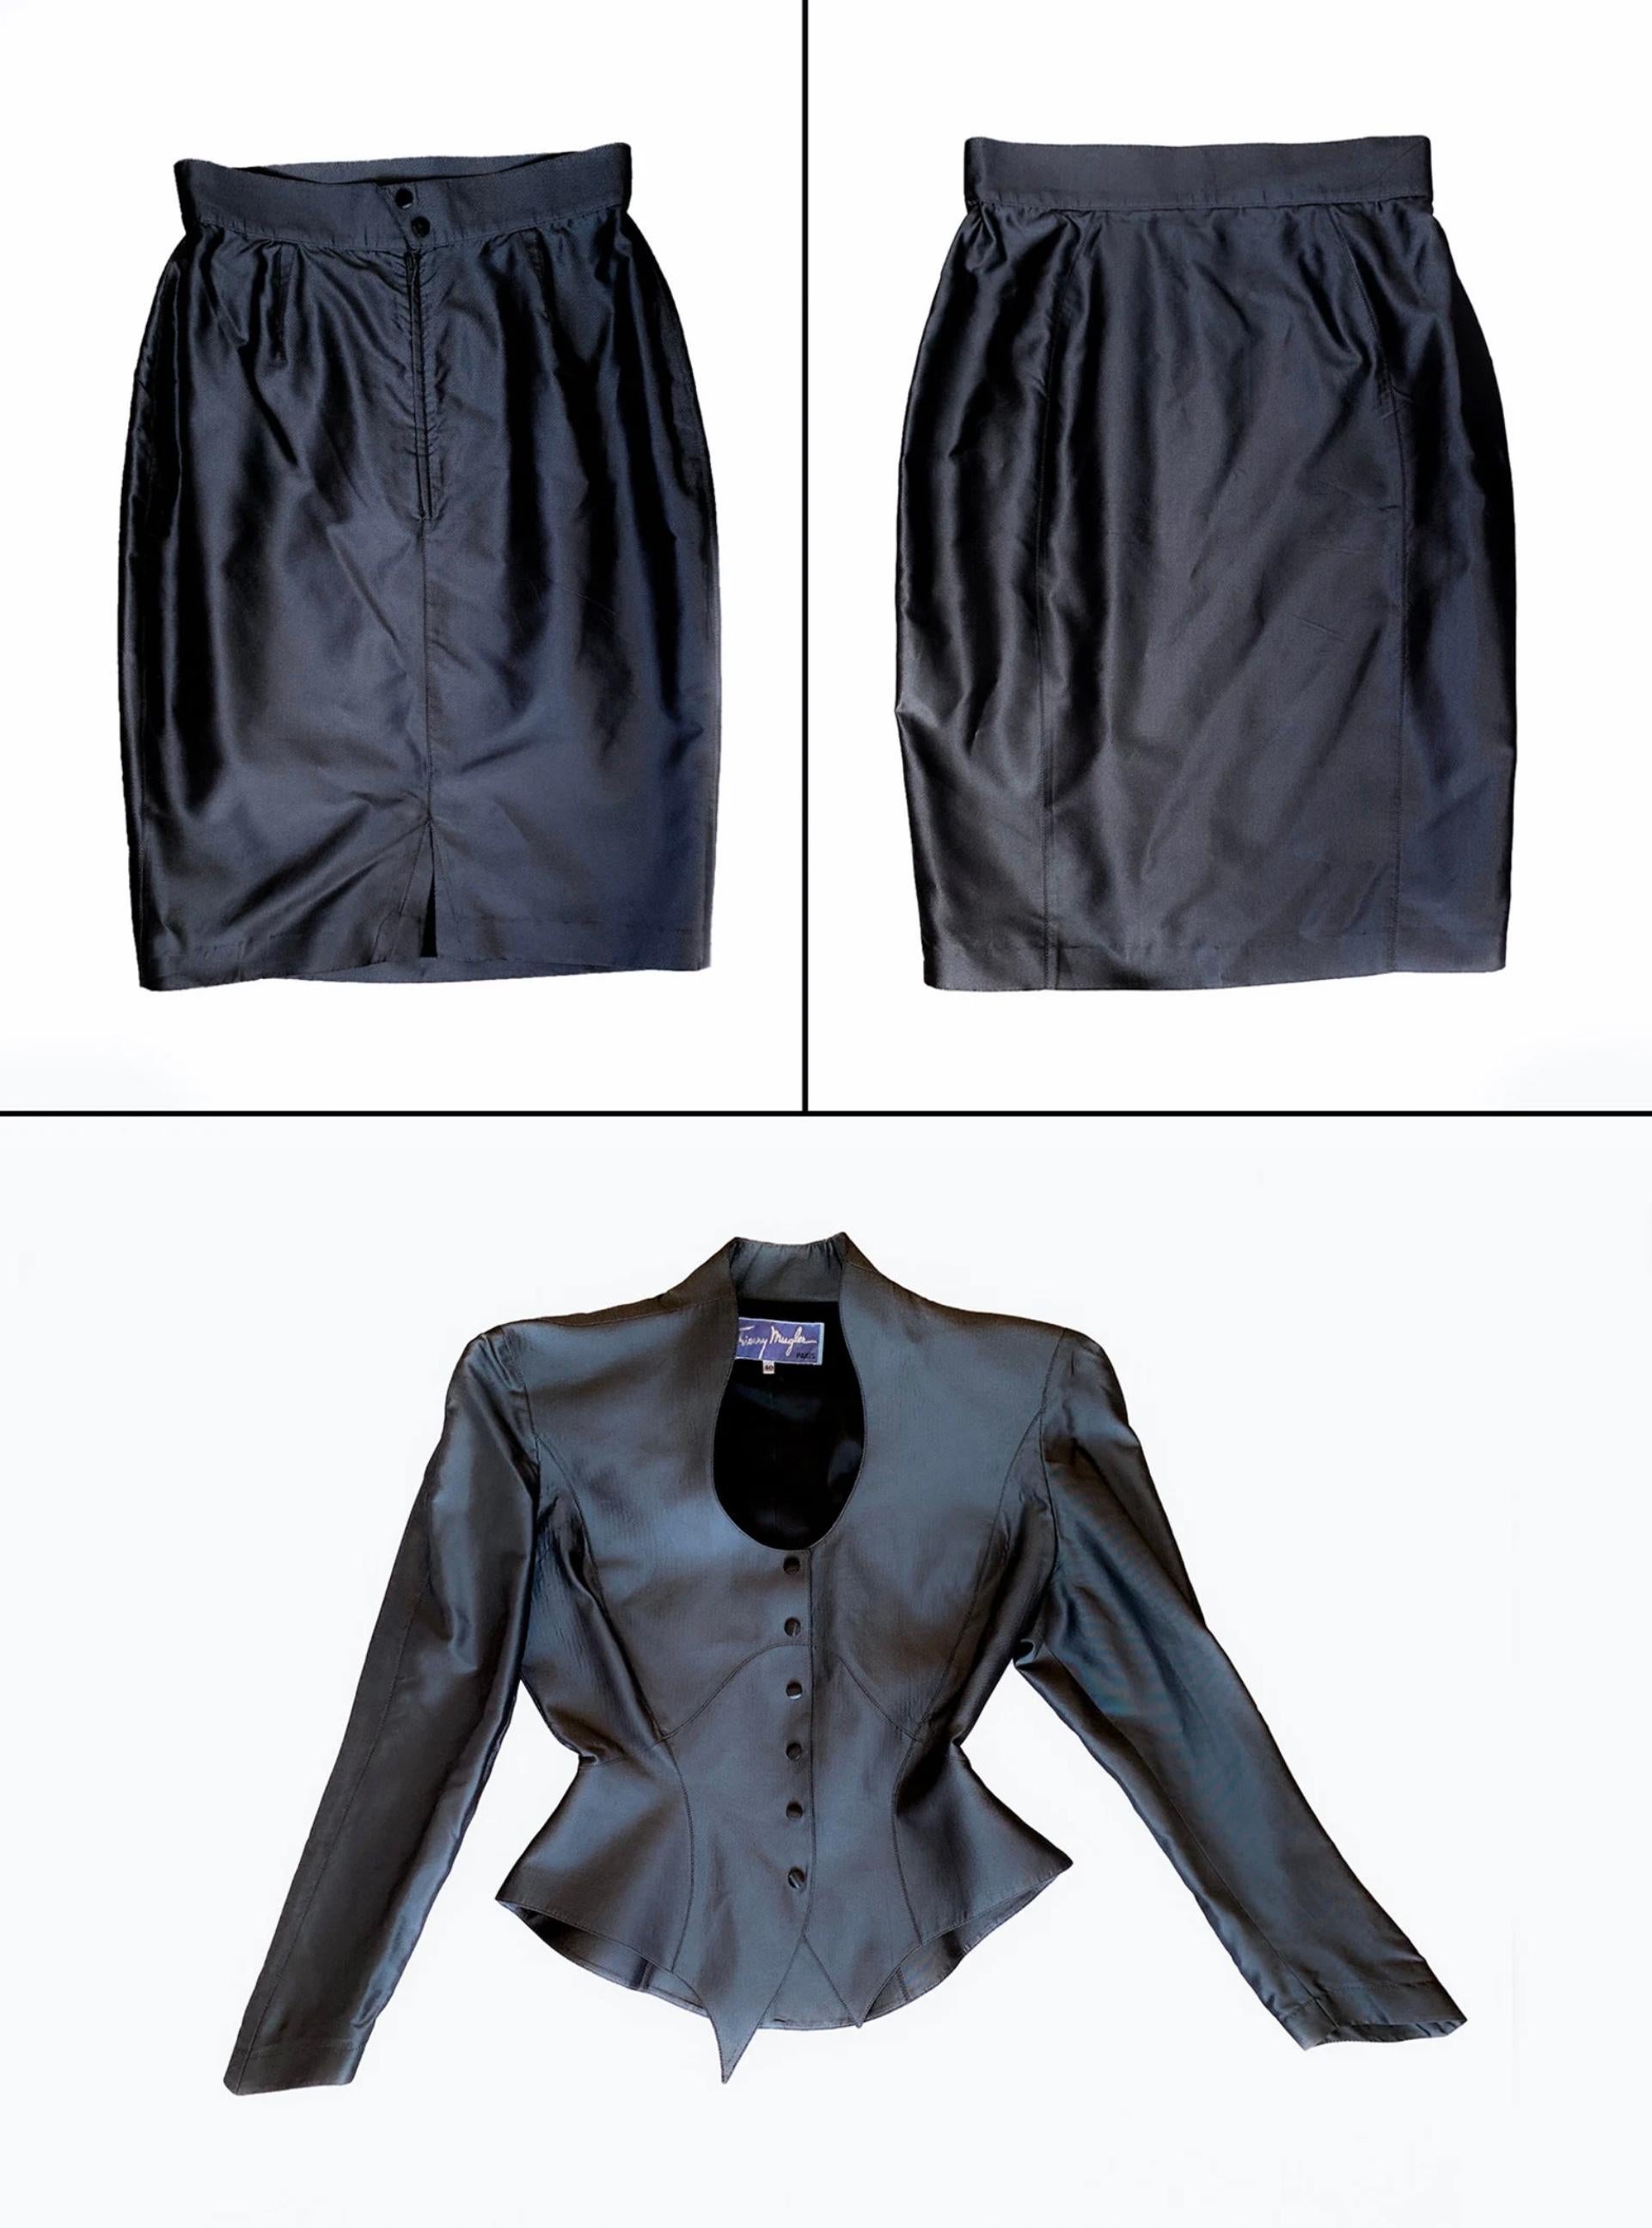 Thierry Mugler Dramatic Sculputral Silk Skirtsuit Jacket Skirt Suit For Sale 1